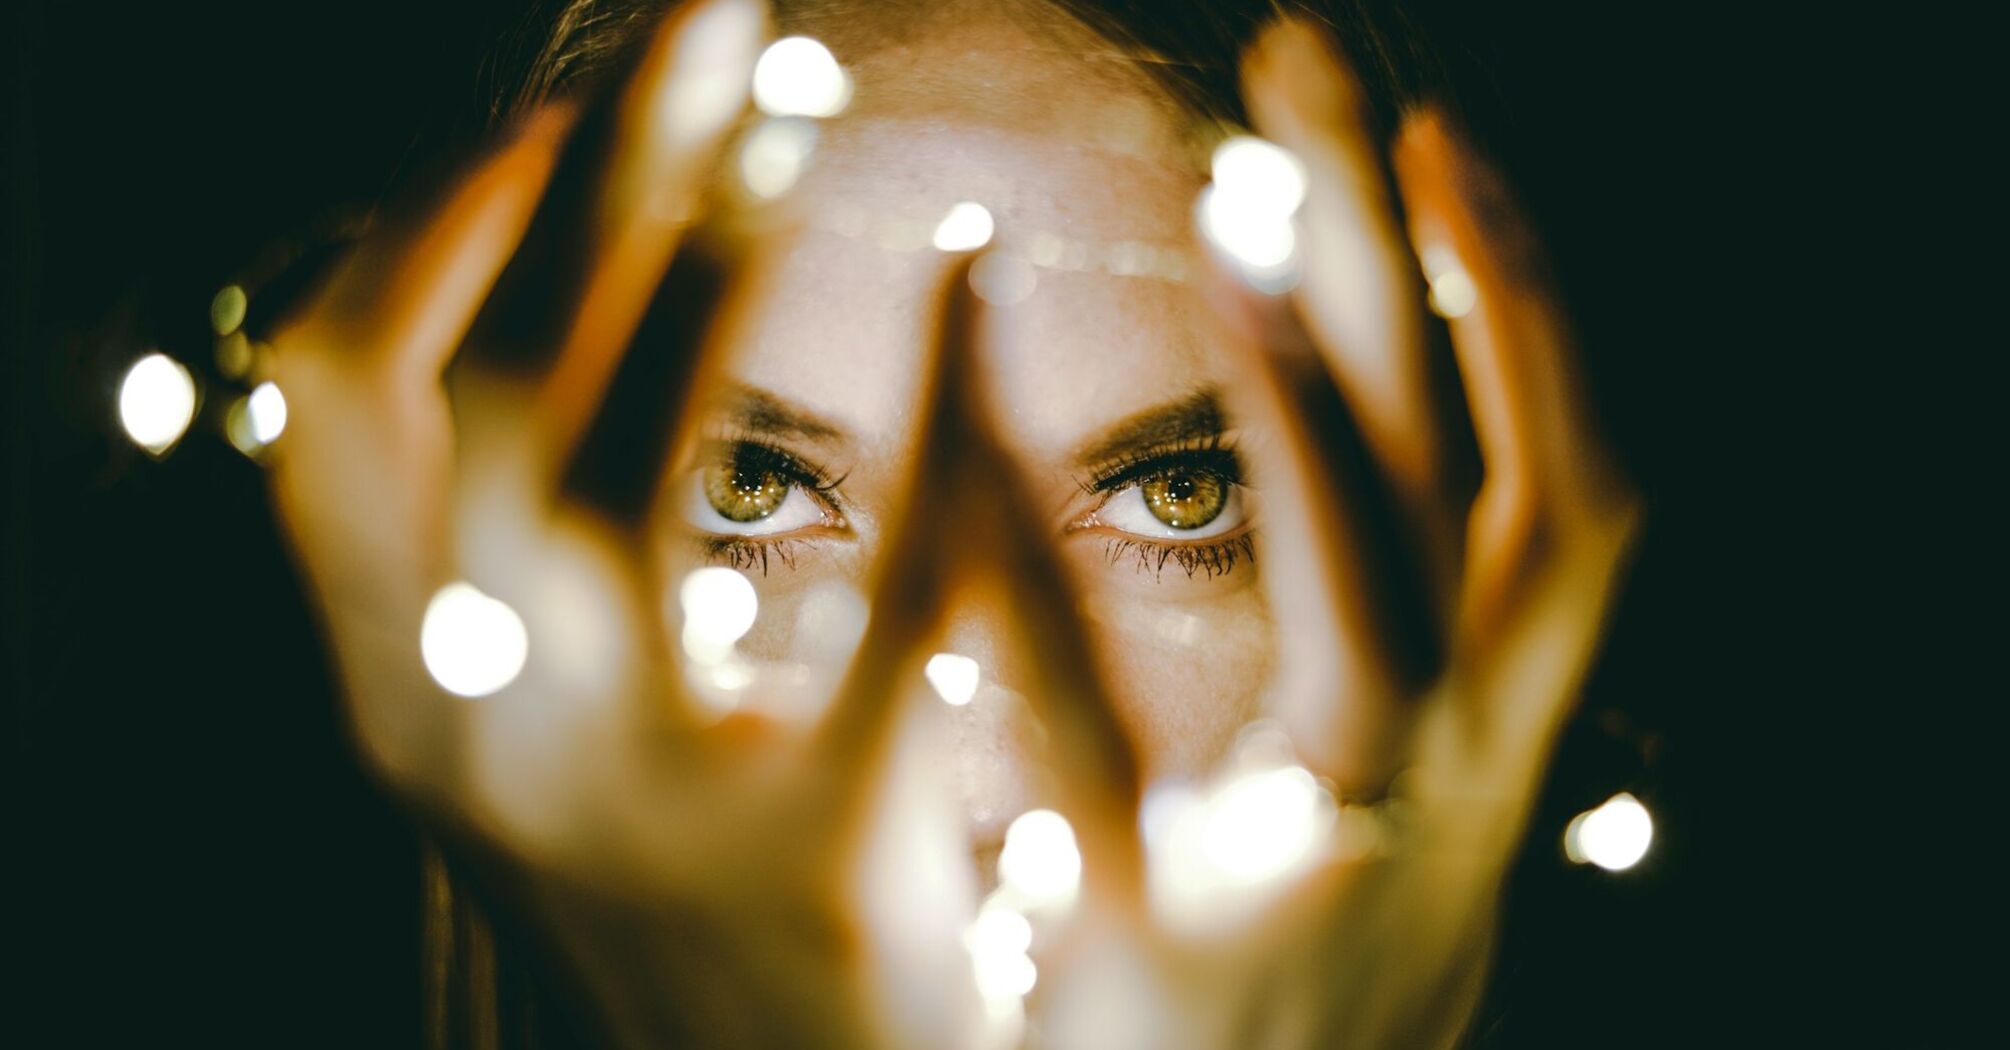 A woman's eyes gazing between her fingers, with soft lights creating a bokeh effect around her hands